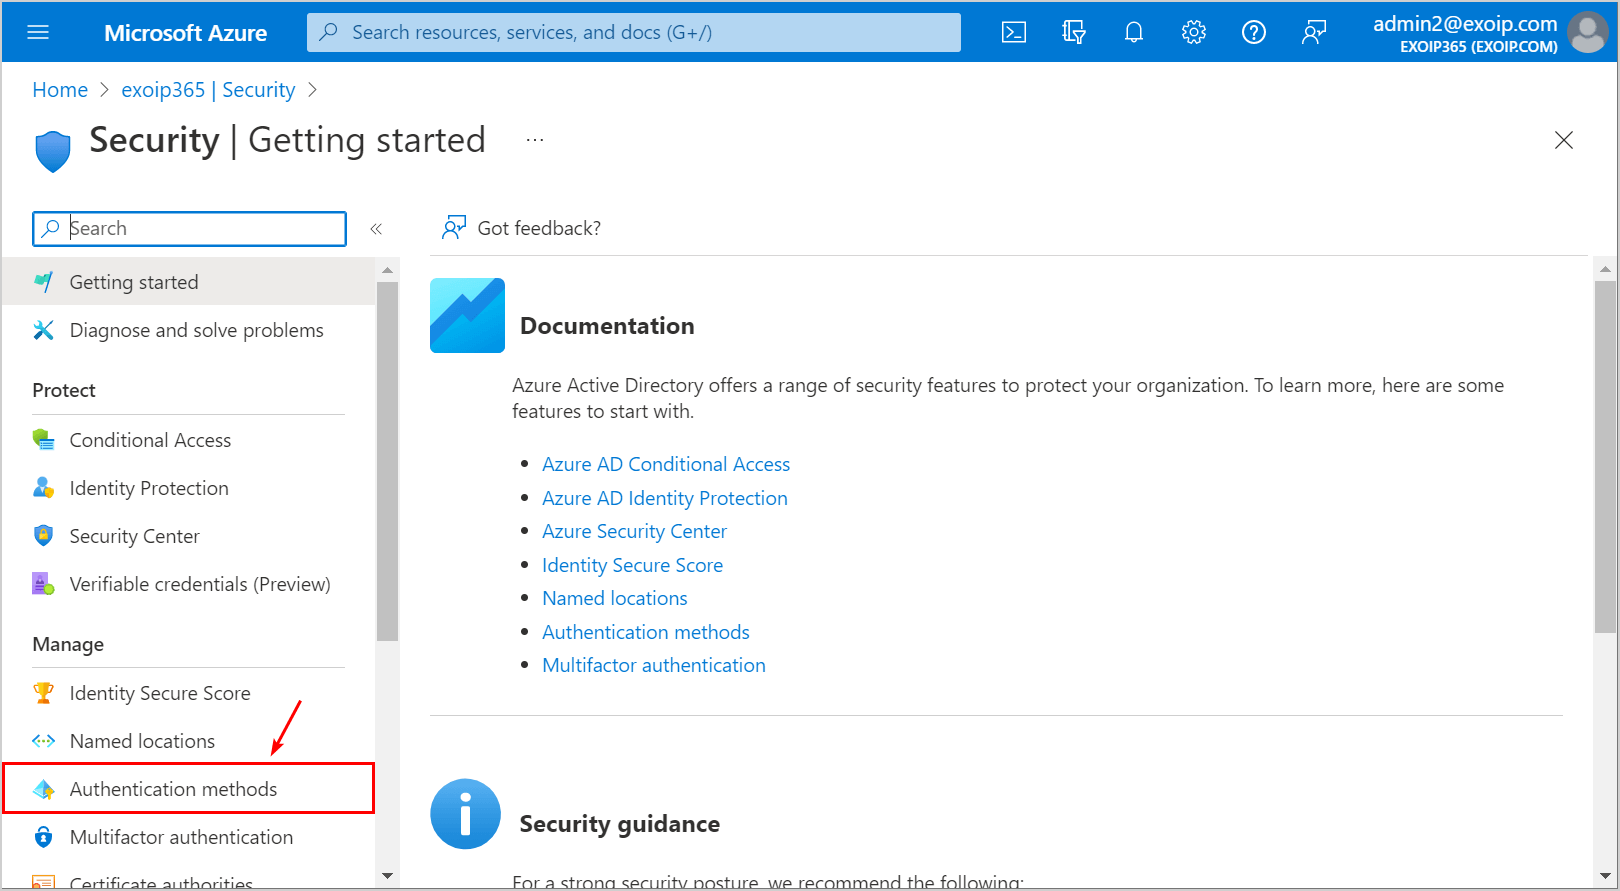 Authentication methods in Microsoft Azure security